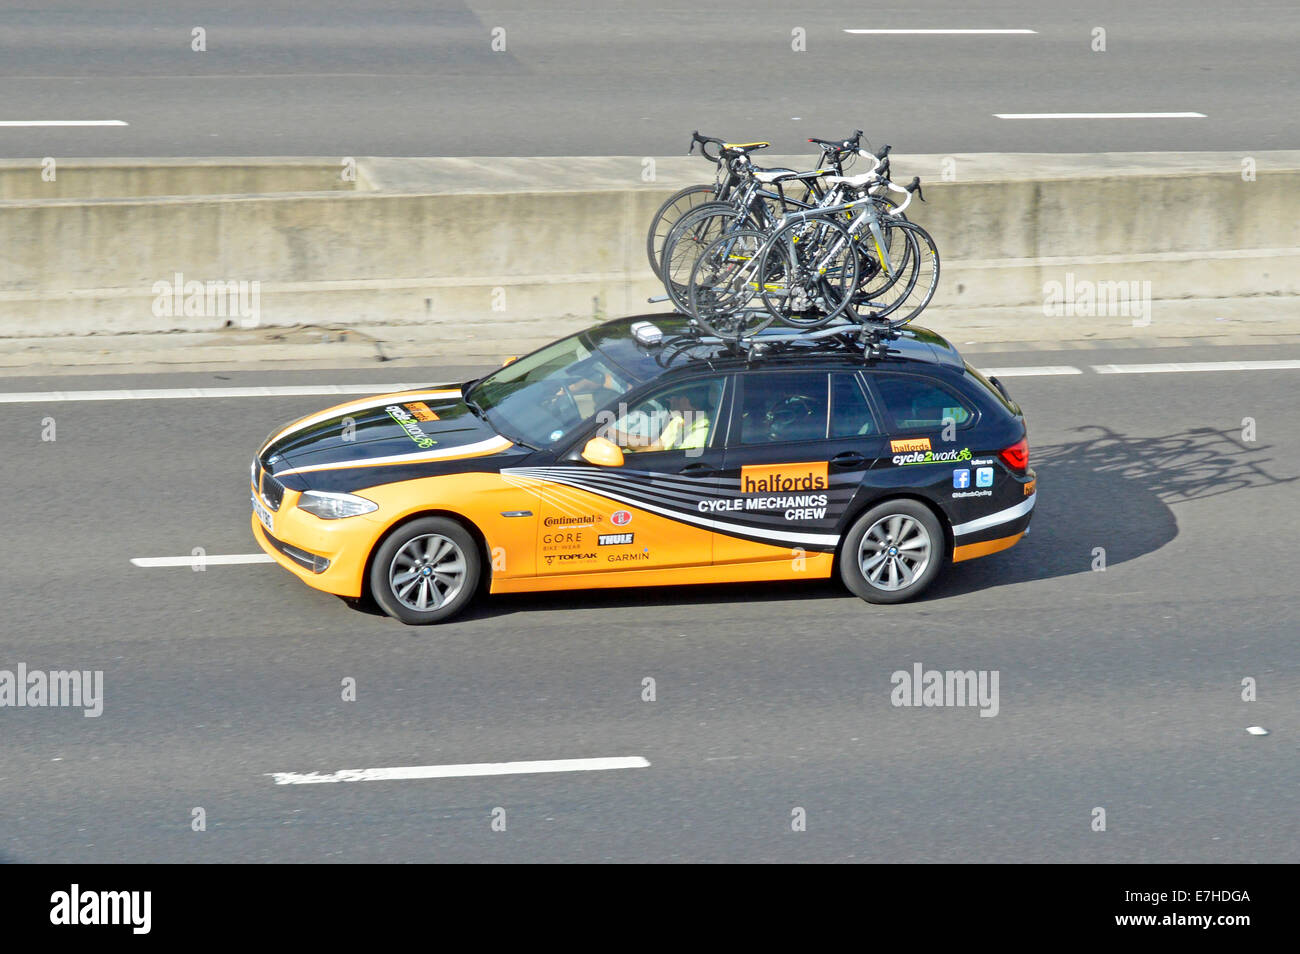 Halfords Cycle Mechanics crew car on motorway with bikes loaded on roof rack and advertising on bodywork Stock Photo